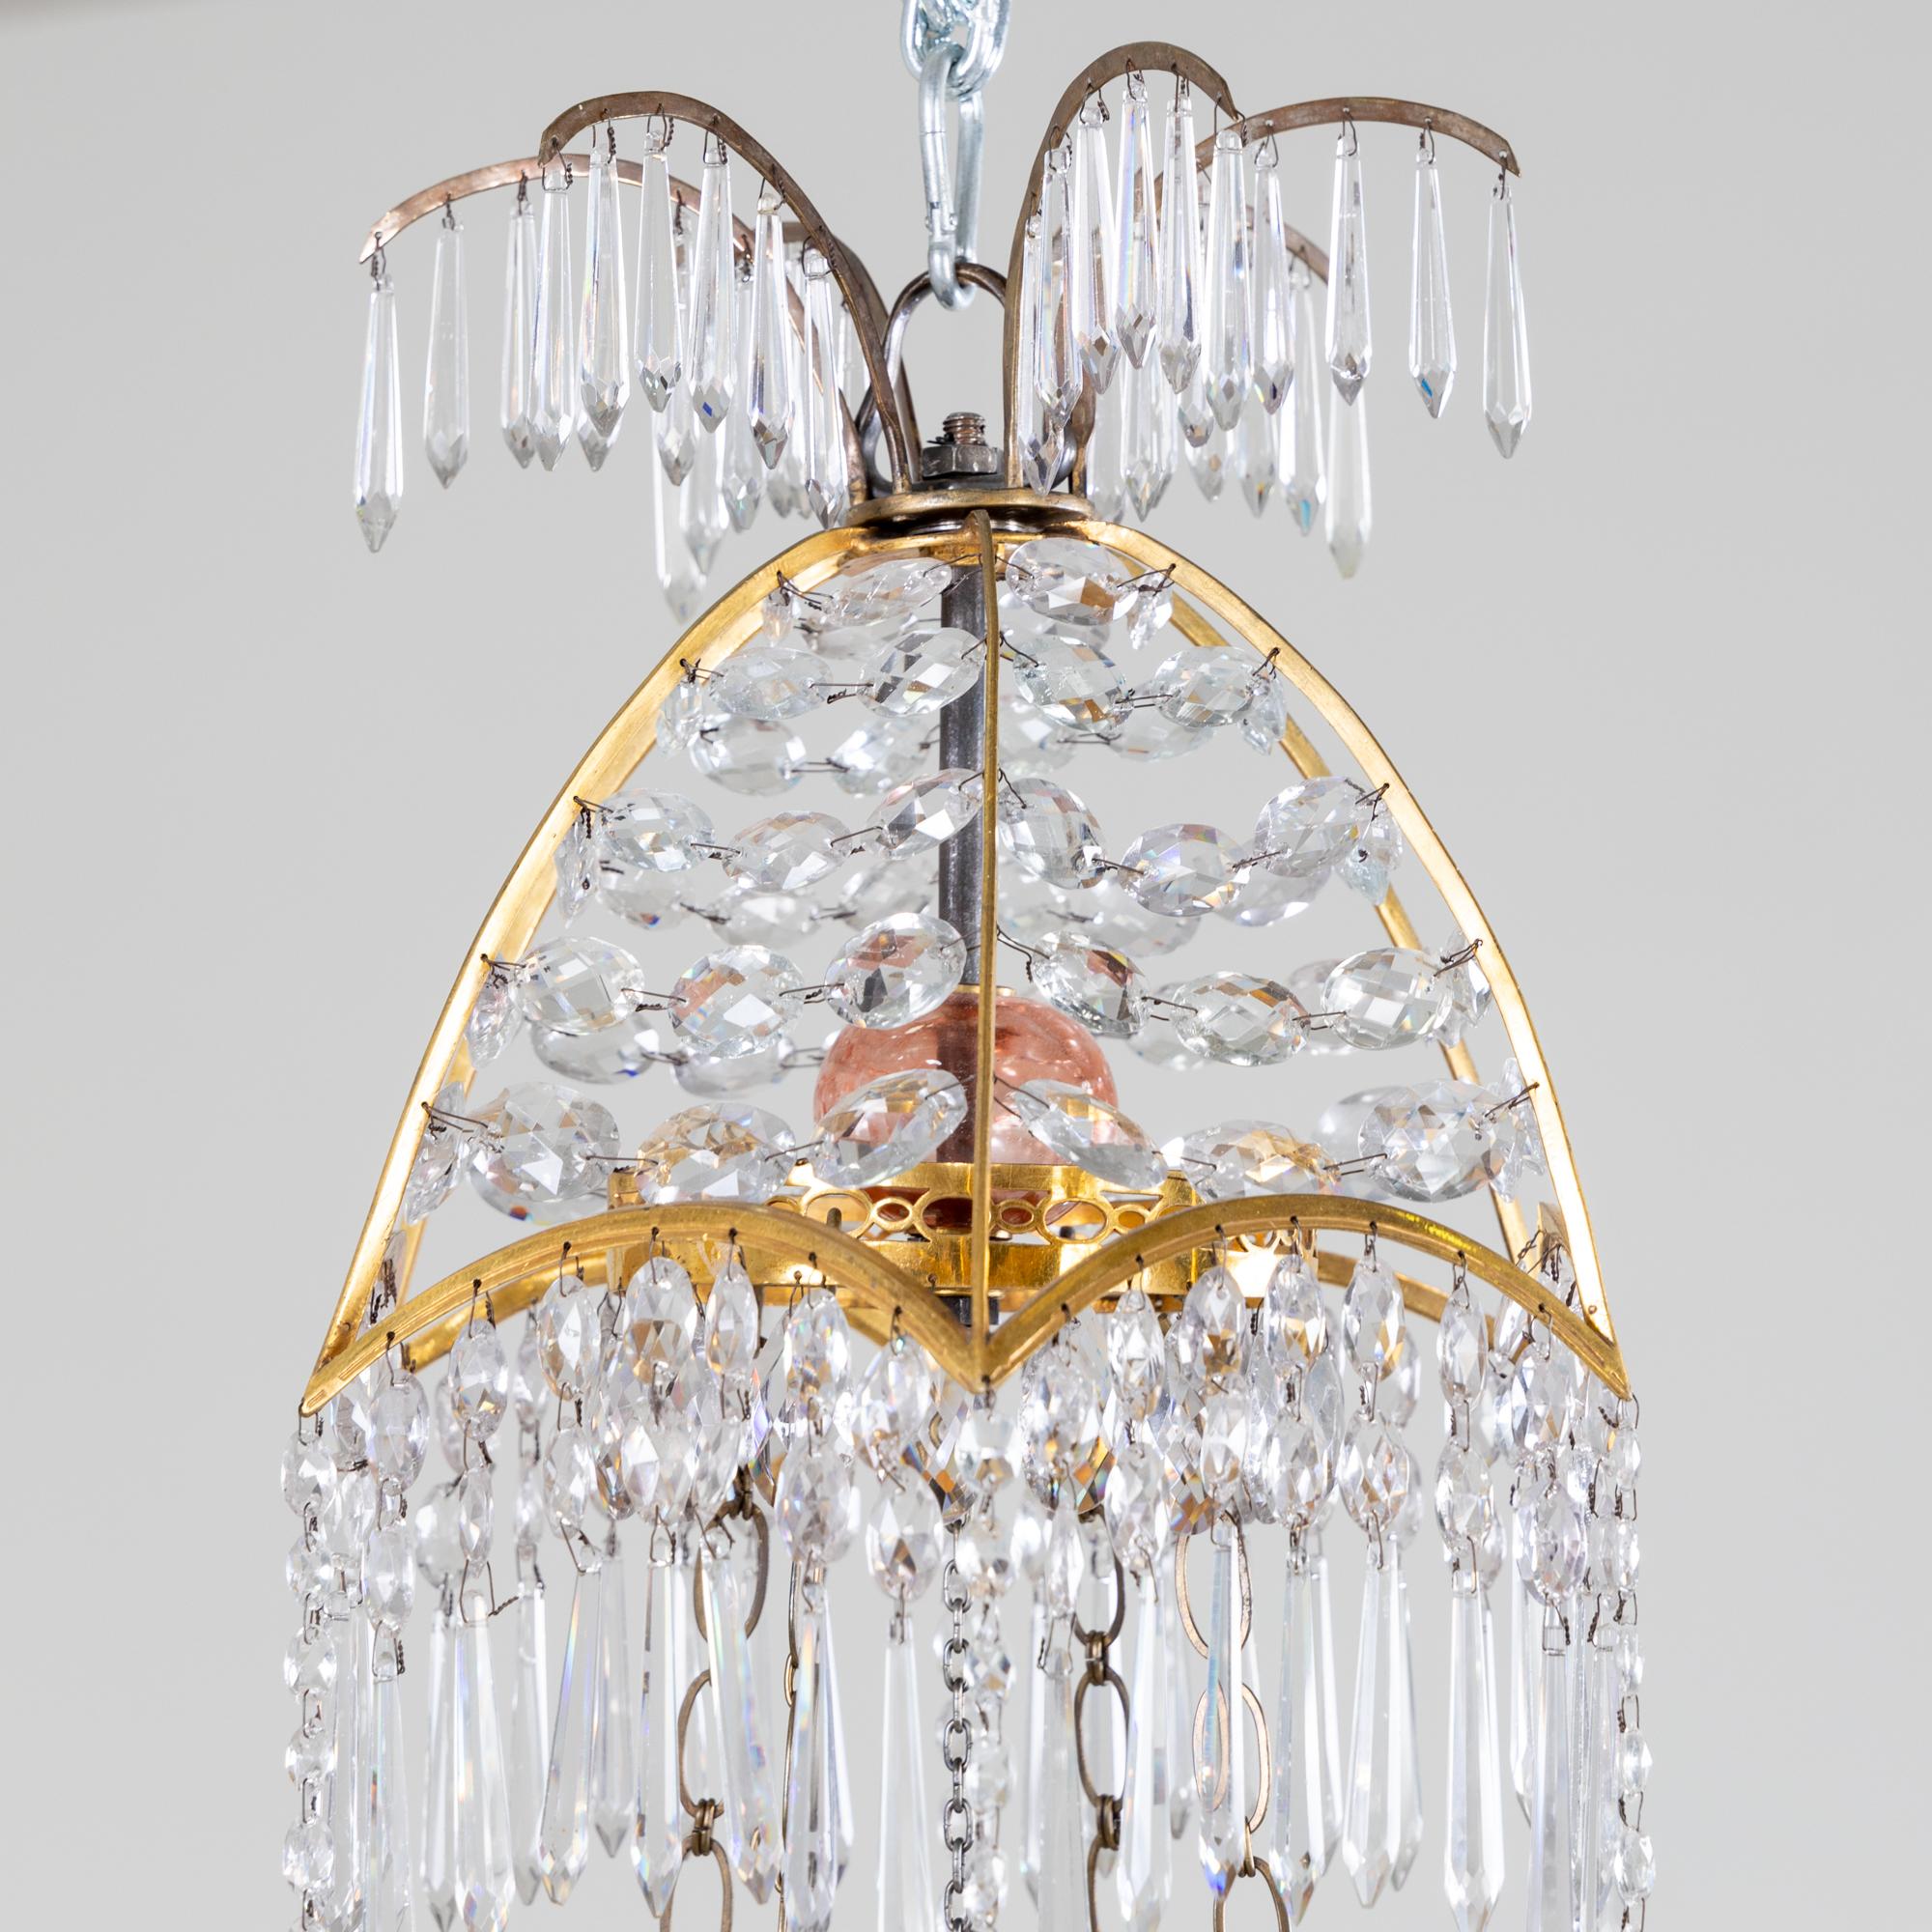 Chandelier with Palm Trees, Werner & Mieth, Berlin c. 1800-1810 For Sale 3